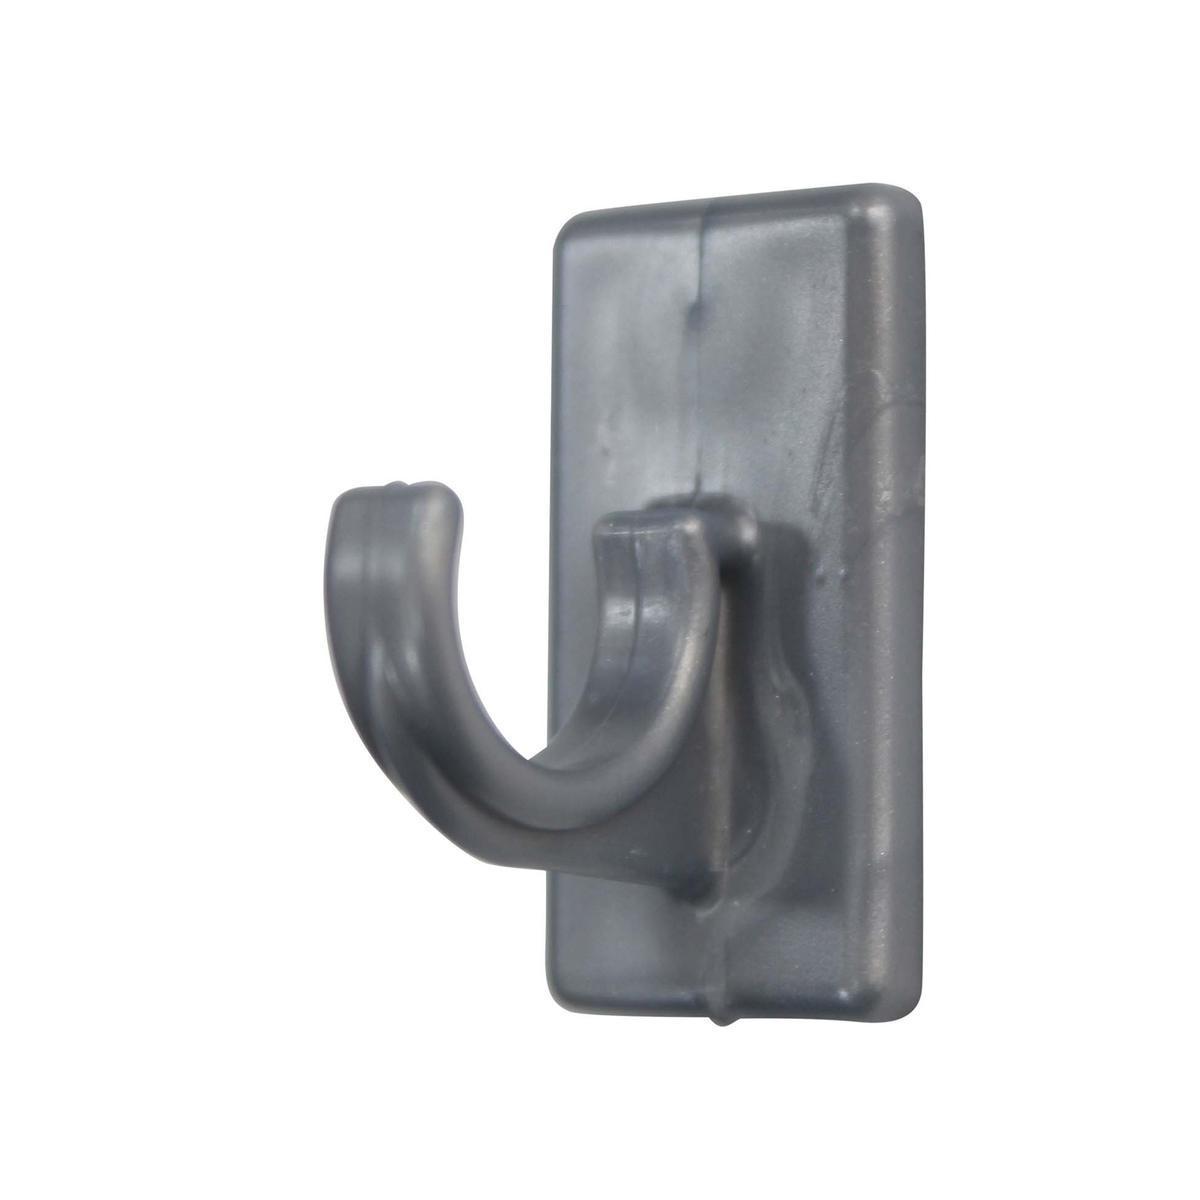 2 supports bistrot courts - L 3 x H 2 x l 2 cm - Gris